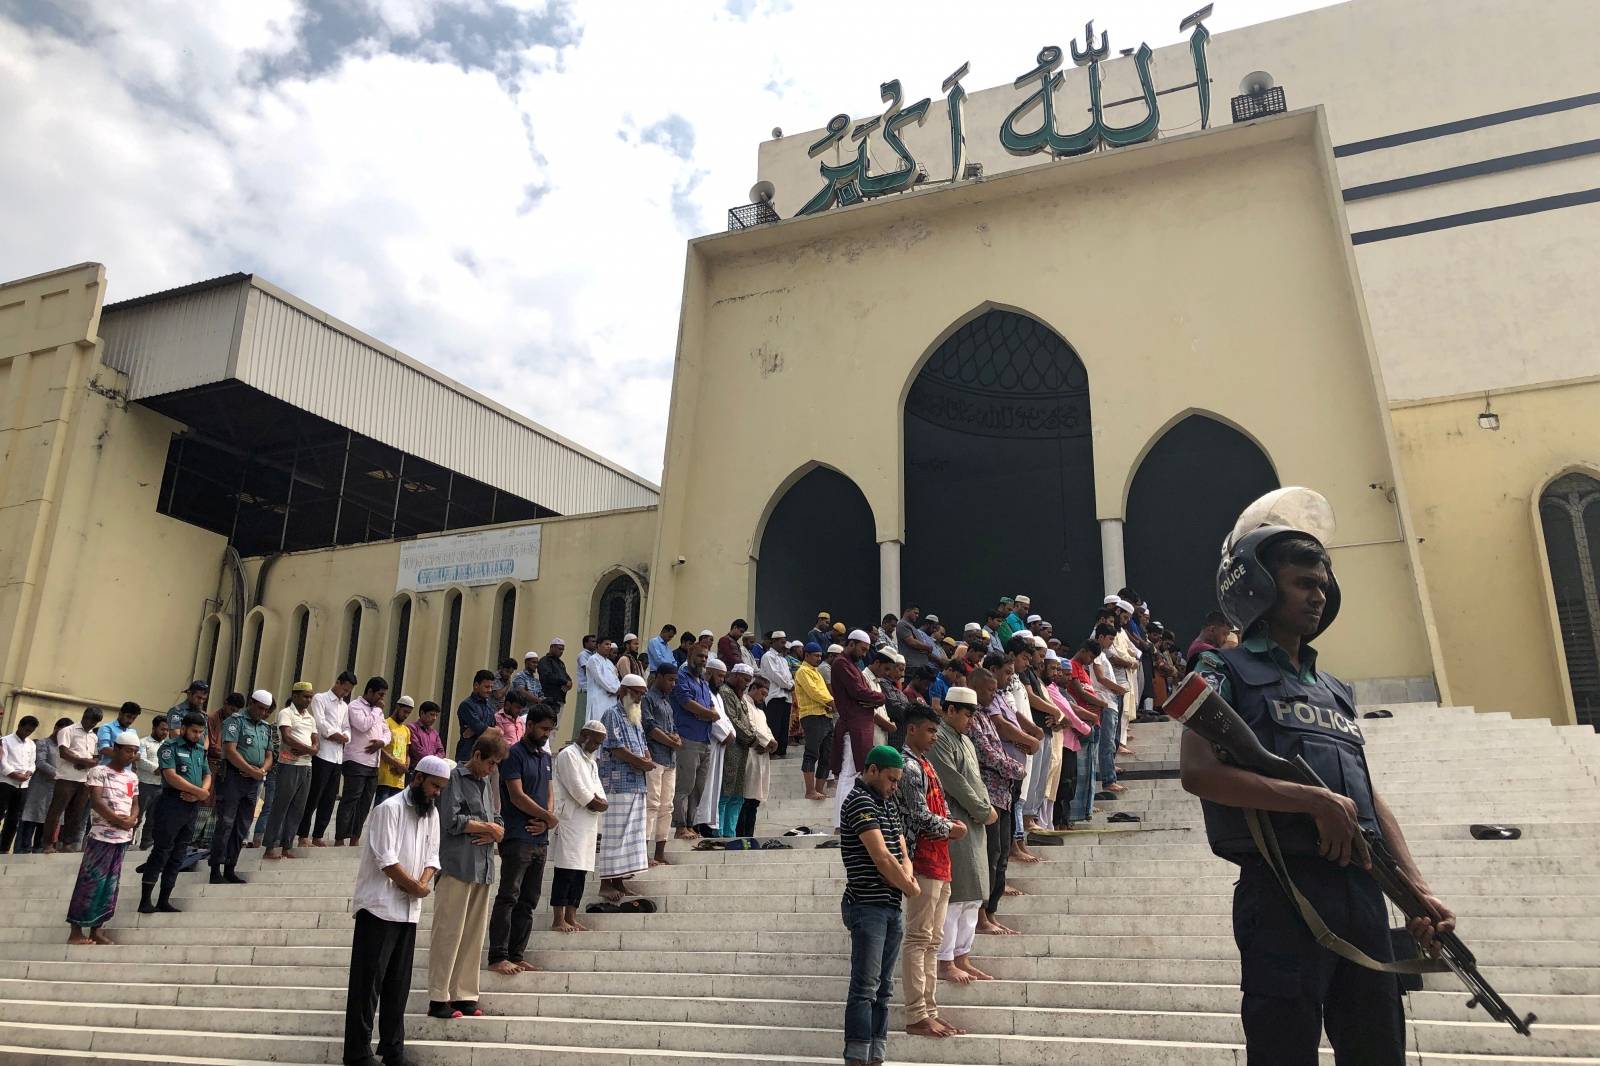 A police officer stands gurad during Friday prayers at the Baitul Mukarram National Mosque, providing extra security after the Christchurch mosque attacks in New Zealand, in Dhaka